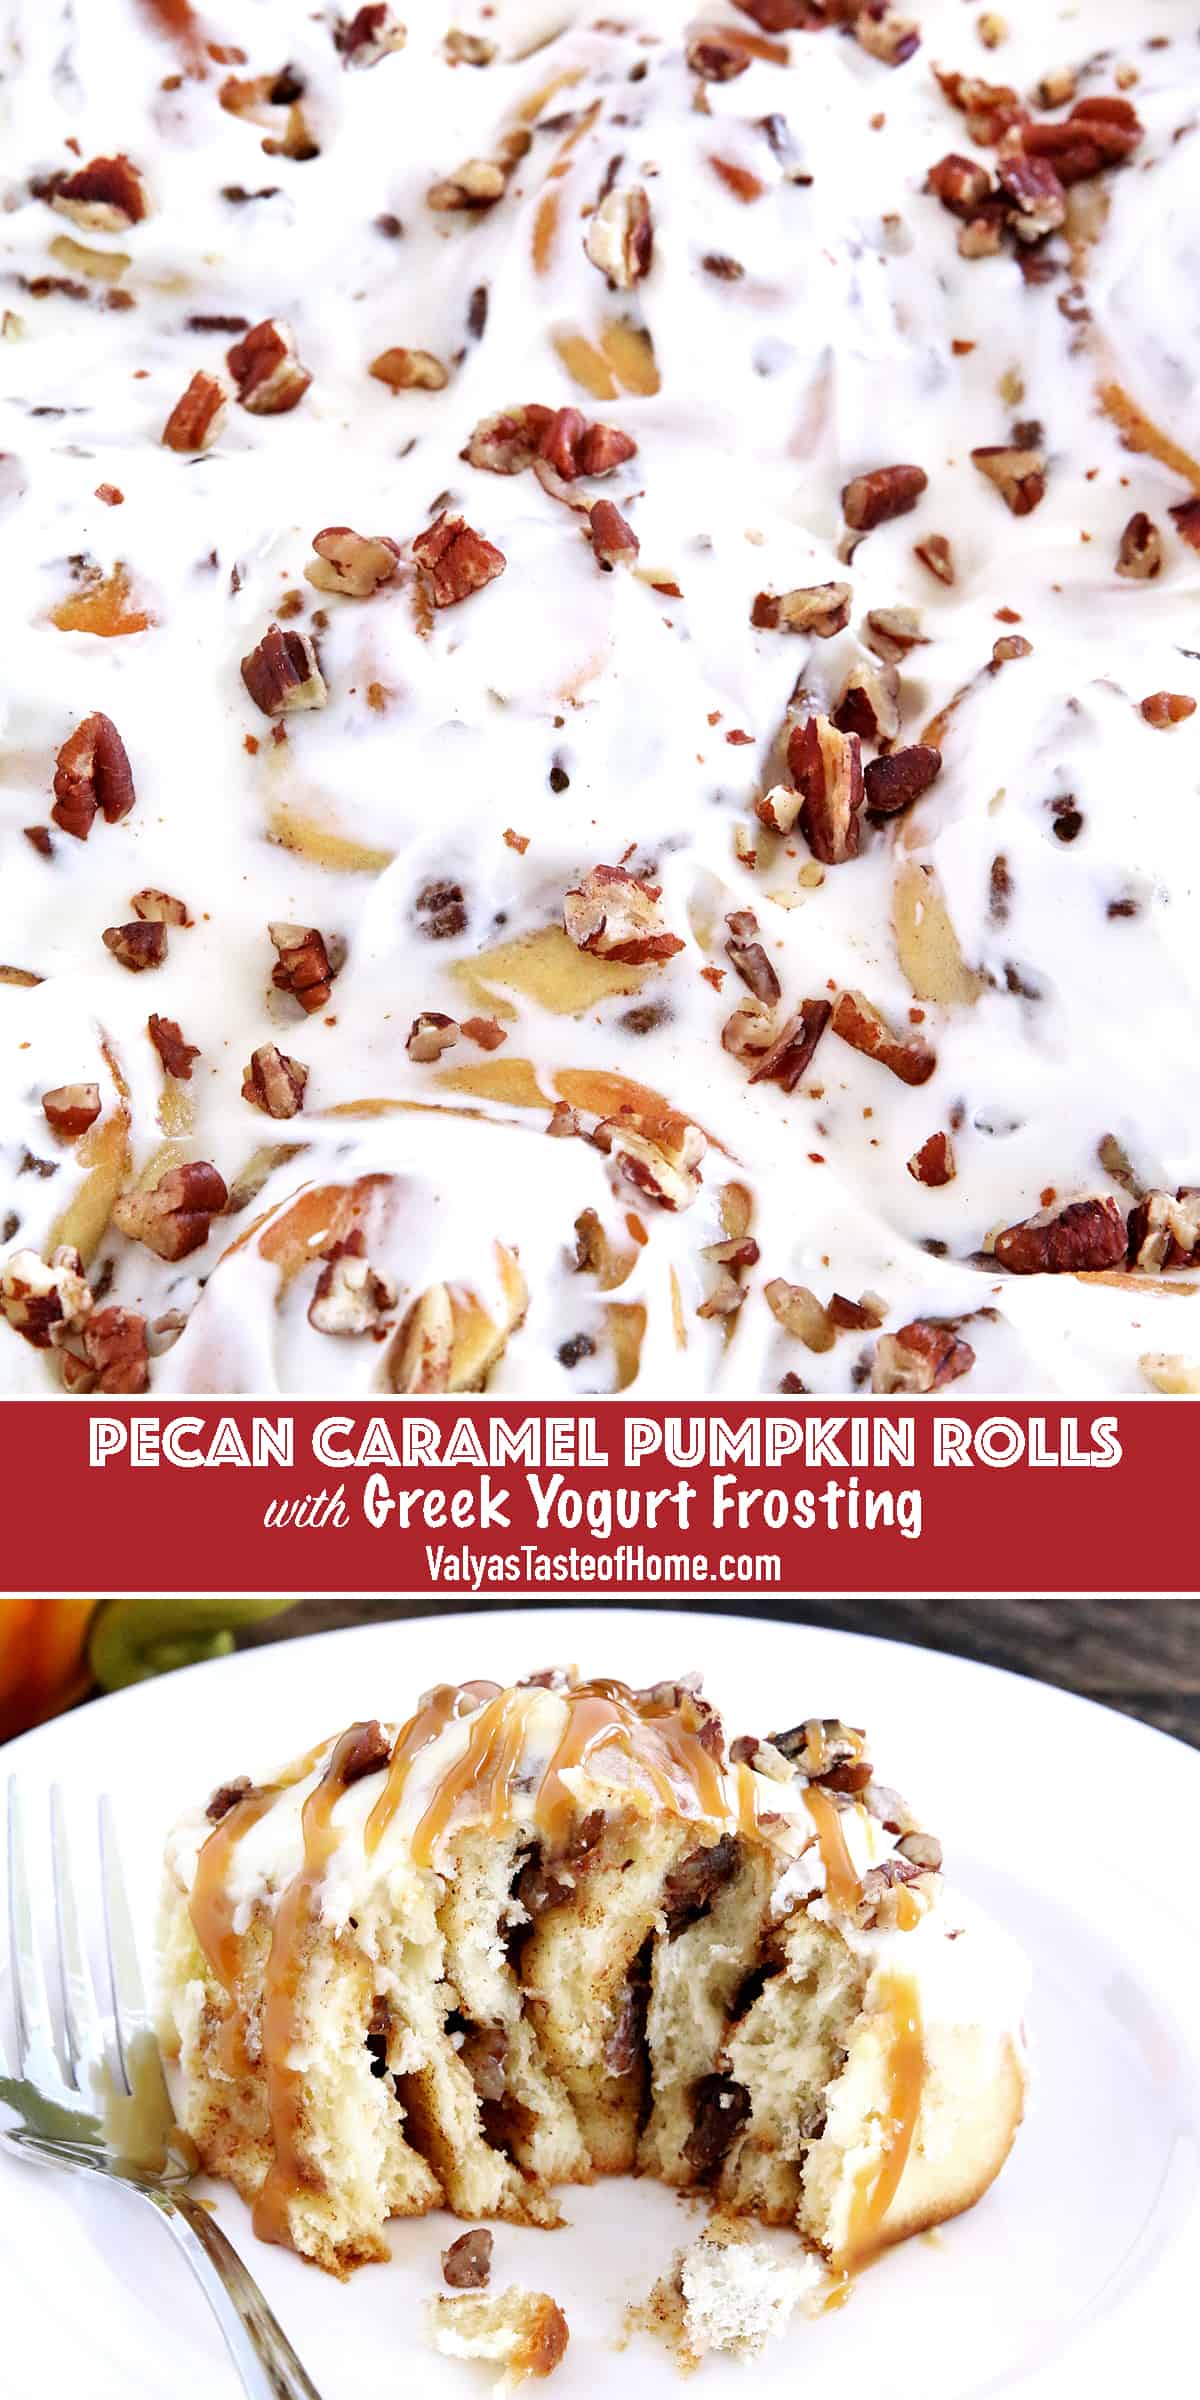 These Pecan Caramel Pumpkin Rolls with Greek Yogurt Frosting..., guys, trust me, are indescribably incredible! Especially fresh and warm out of the oven; they just melt in your mouth. Oh, yum!